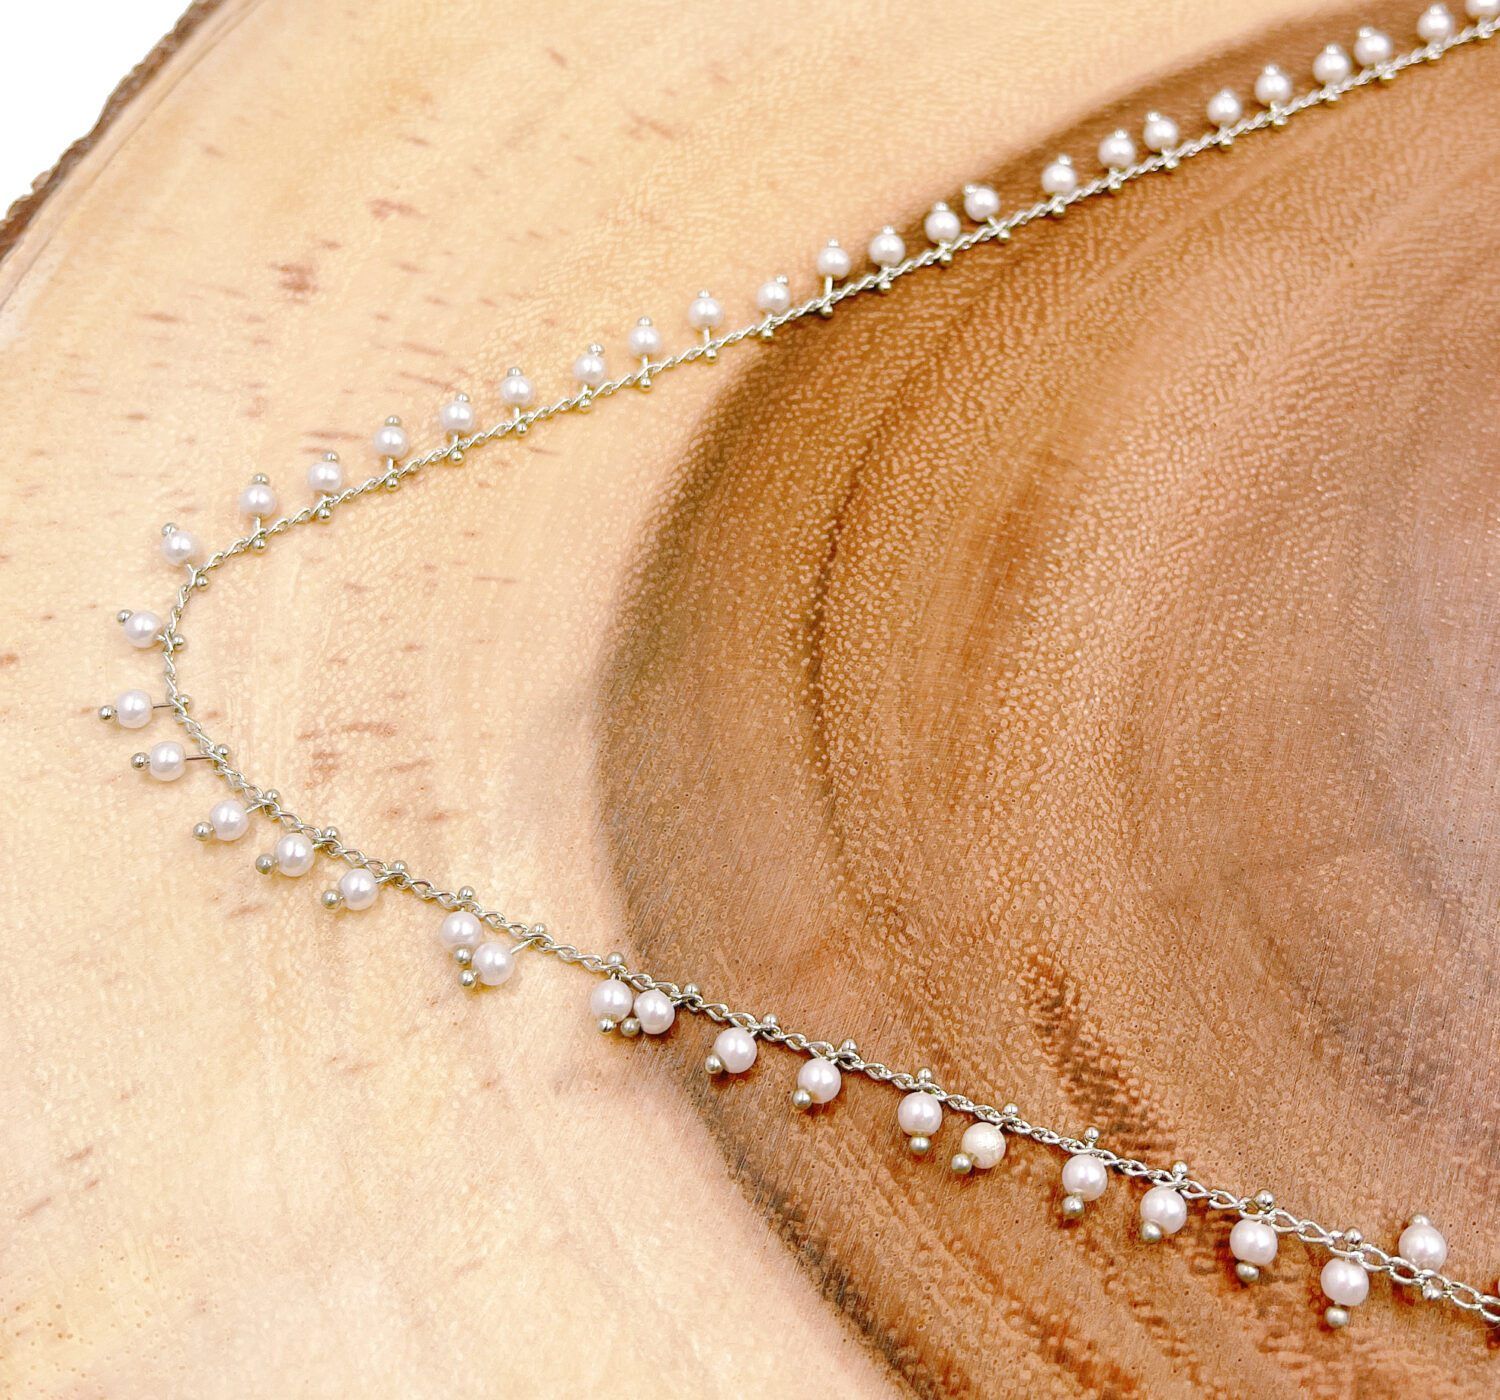 18K Gold White shell Pearl Beaded Chain, Pearl Chain by Yard, Wholesale  bulk Roll Chain for Necklace Bracelet Jewelry Making, 3mm, CH168 -  BeadsCreation4u